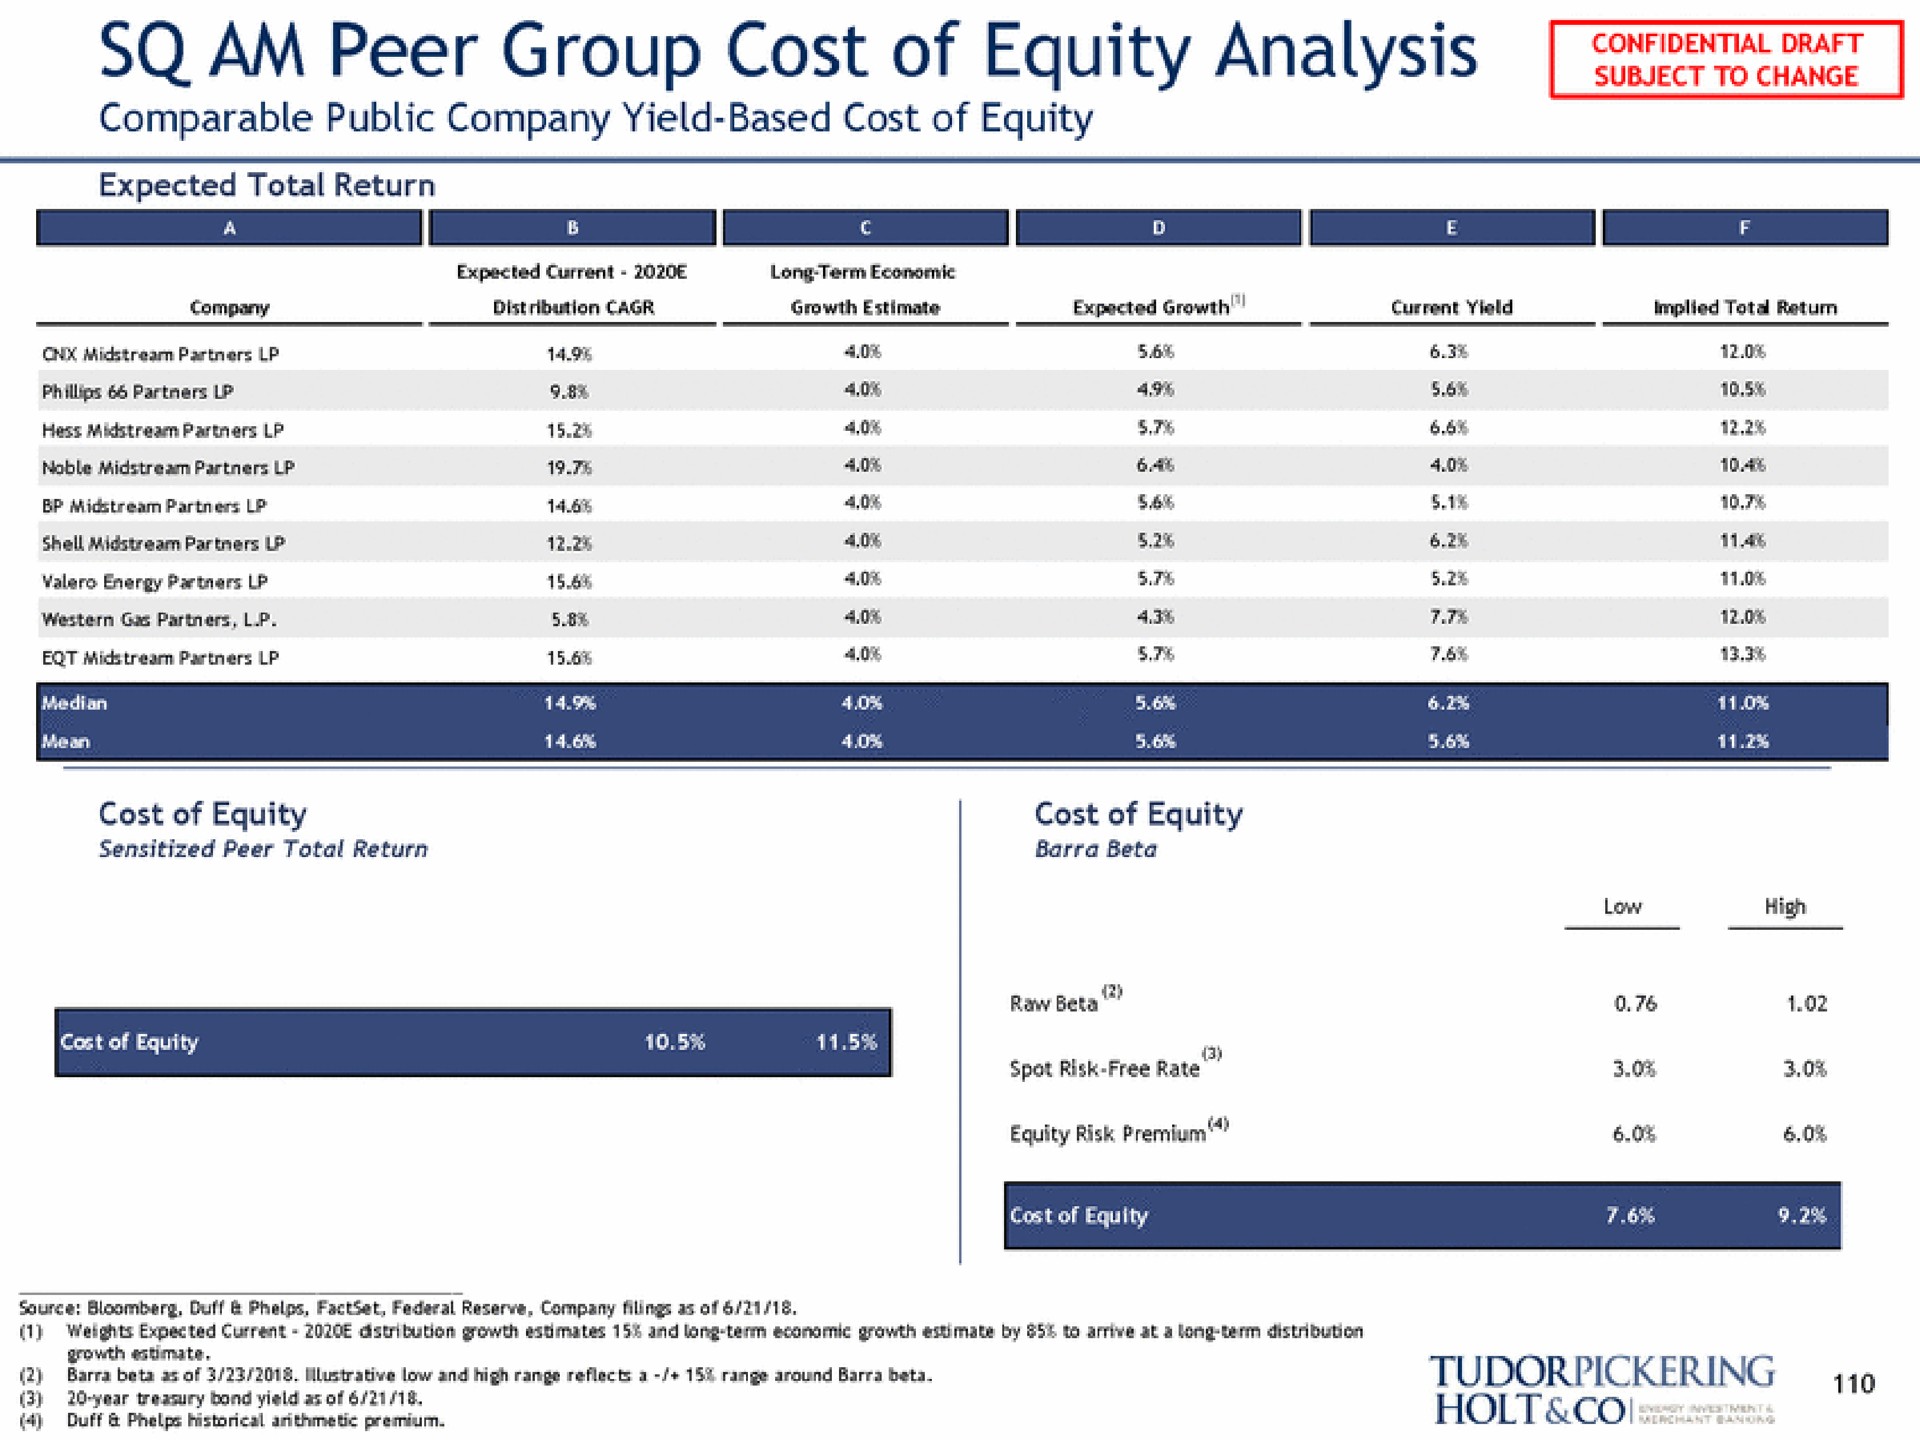 am peer group cost of equity analysis a | Tudor, Pickering, Holt & Co